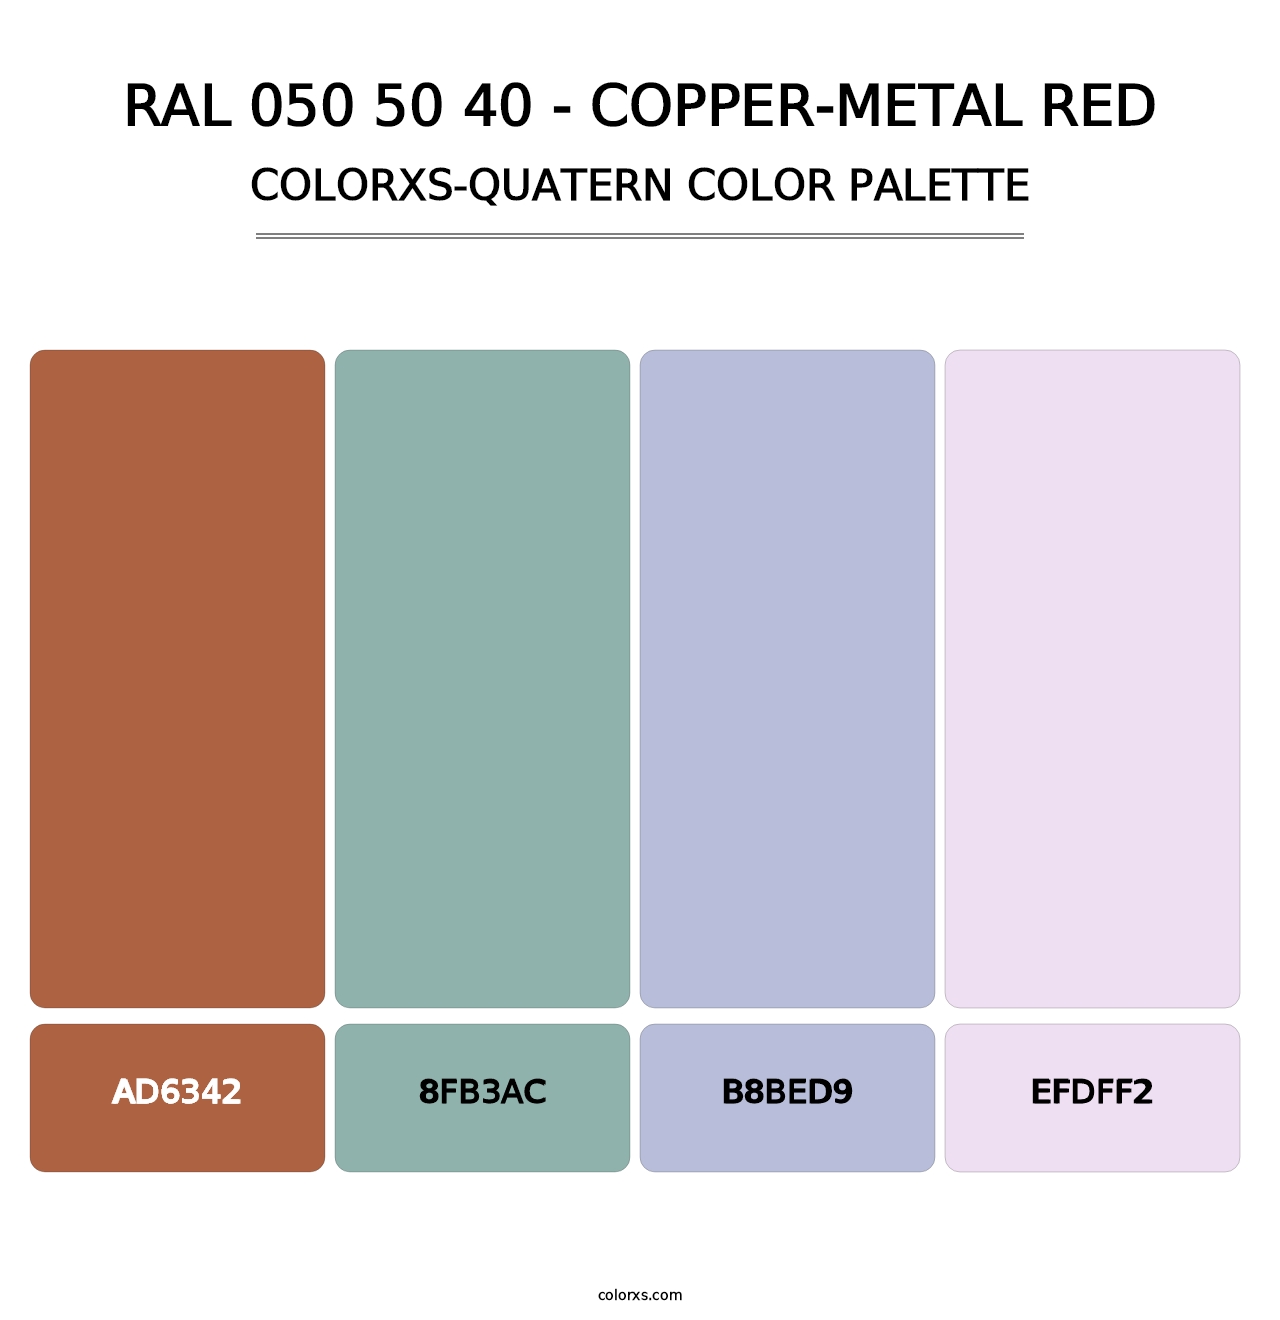 RAL 050 50 40 - Copper-Metal Red - Colorxs Quatern Palette